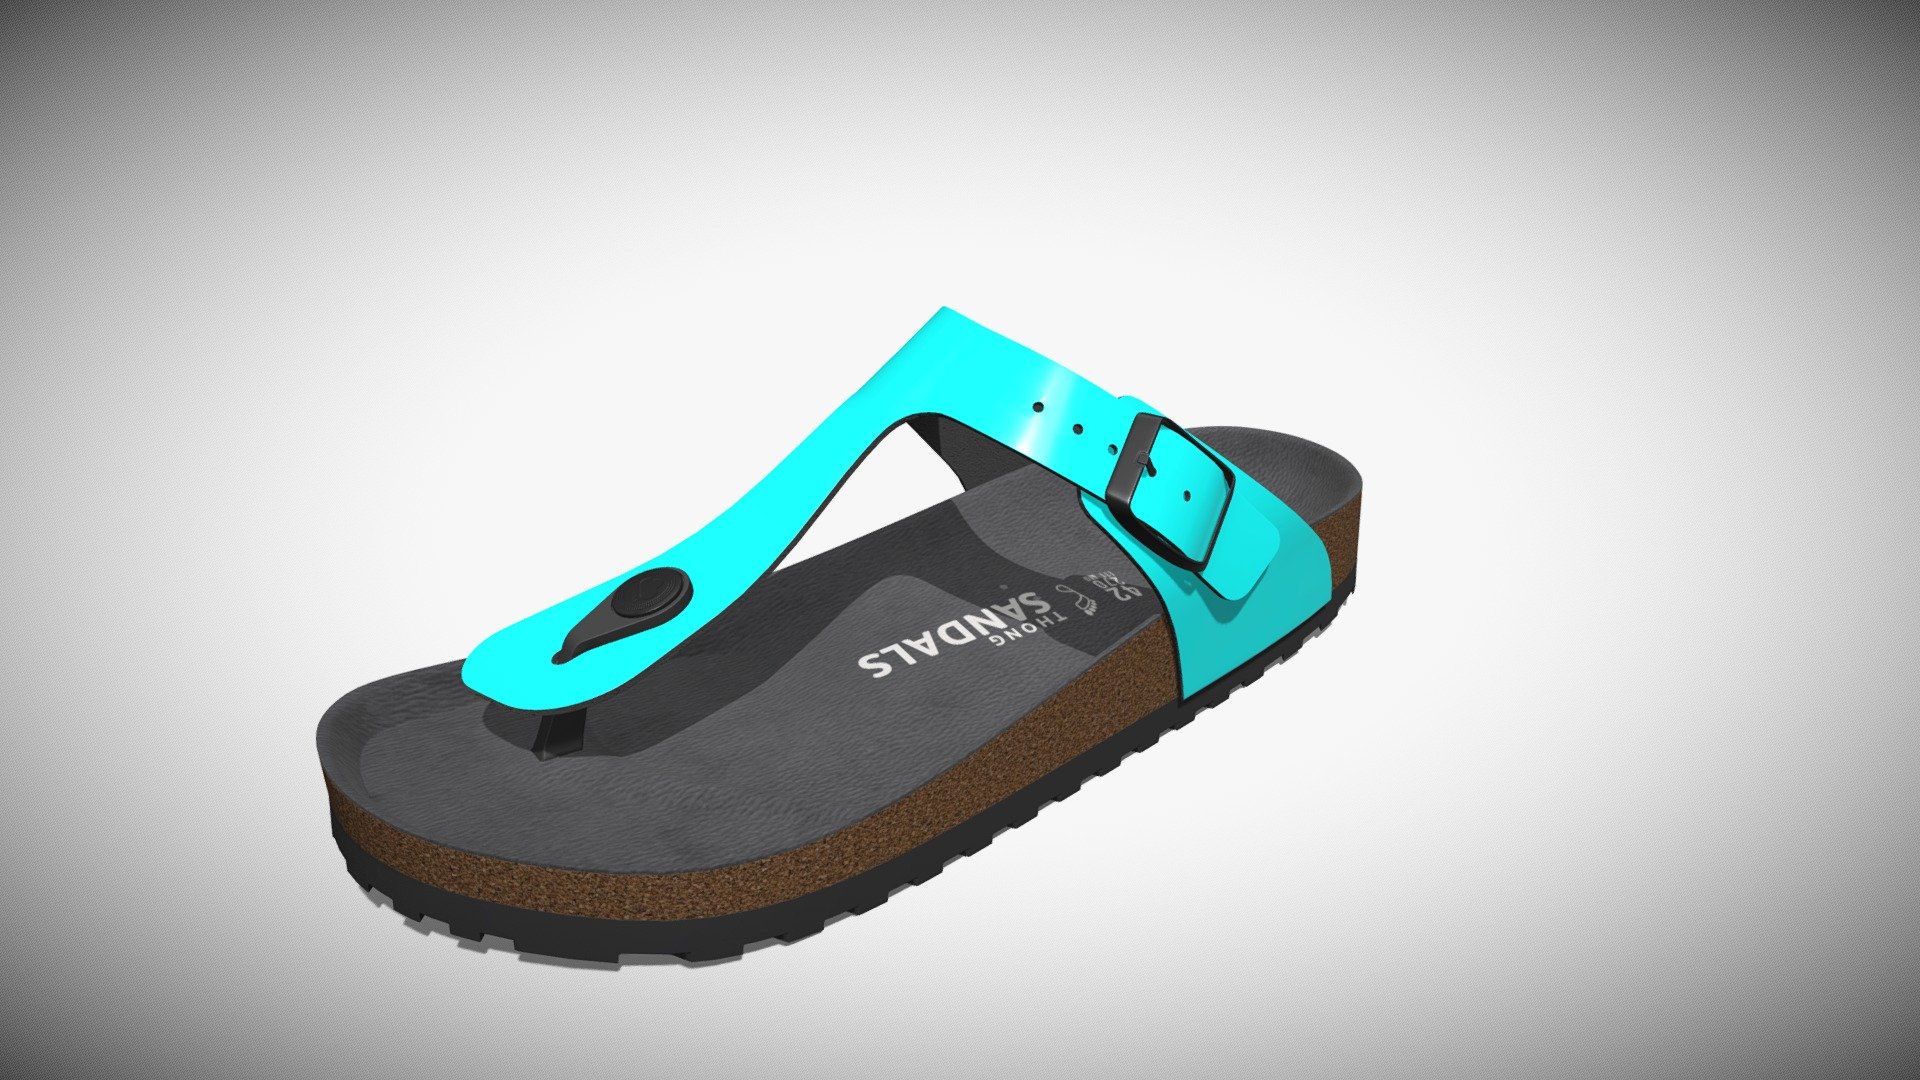 Detailed 3D model of a pair of cyan patent leather thong sandals, modeled in Cinema 4D. The model was created using approximate real world dimensions.

The model has 54,104 polys and 54,150 vertices.

An additional file has been provided containing the original Cinema 4D project file with both standard and v-ray materials, textures and other 3d format such as 3ds, fbx and obj. These files contain both the left and right pair of the shoes 3d model